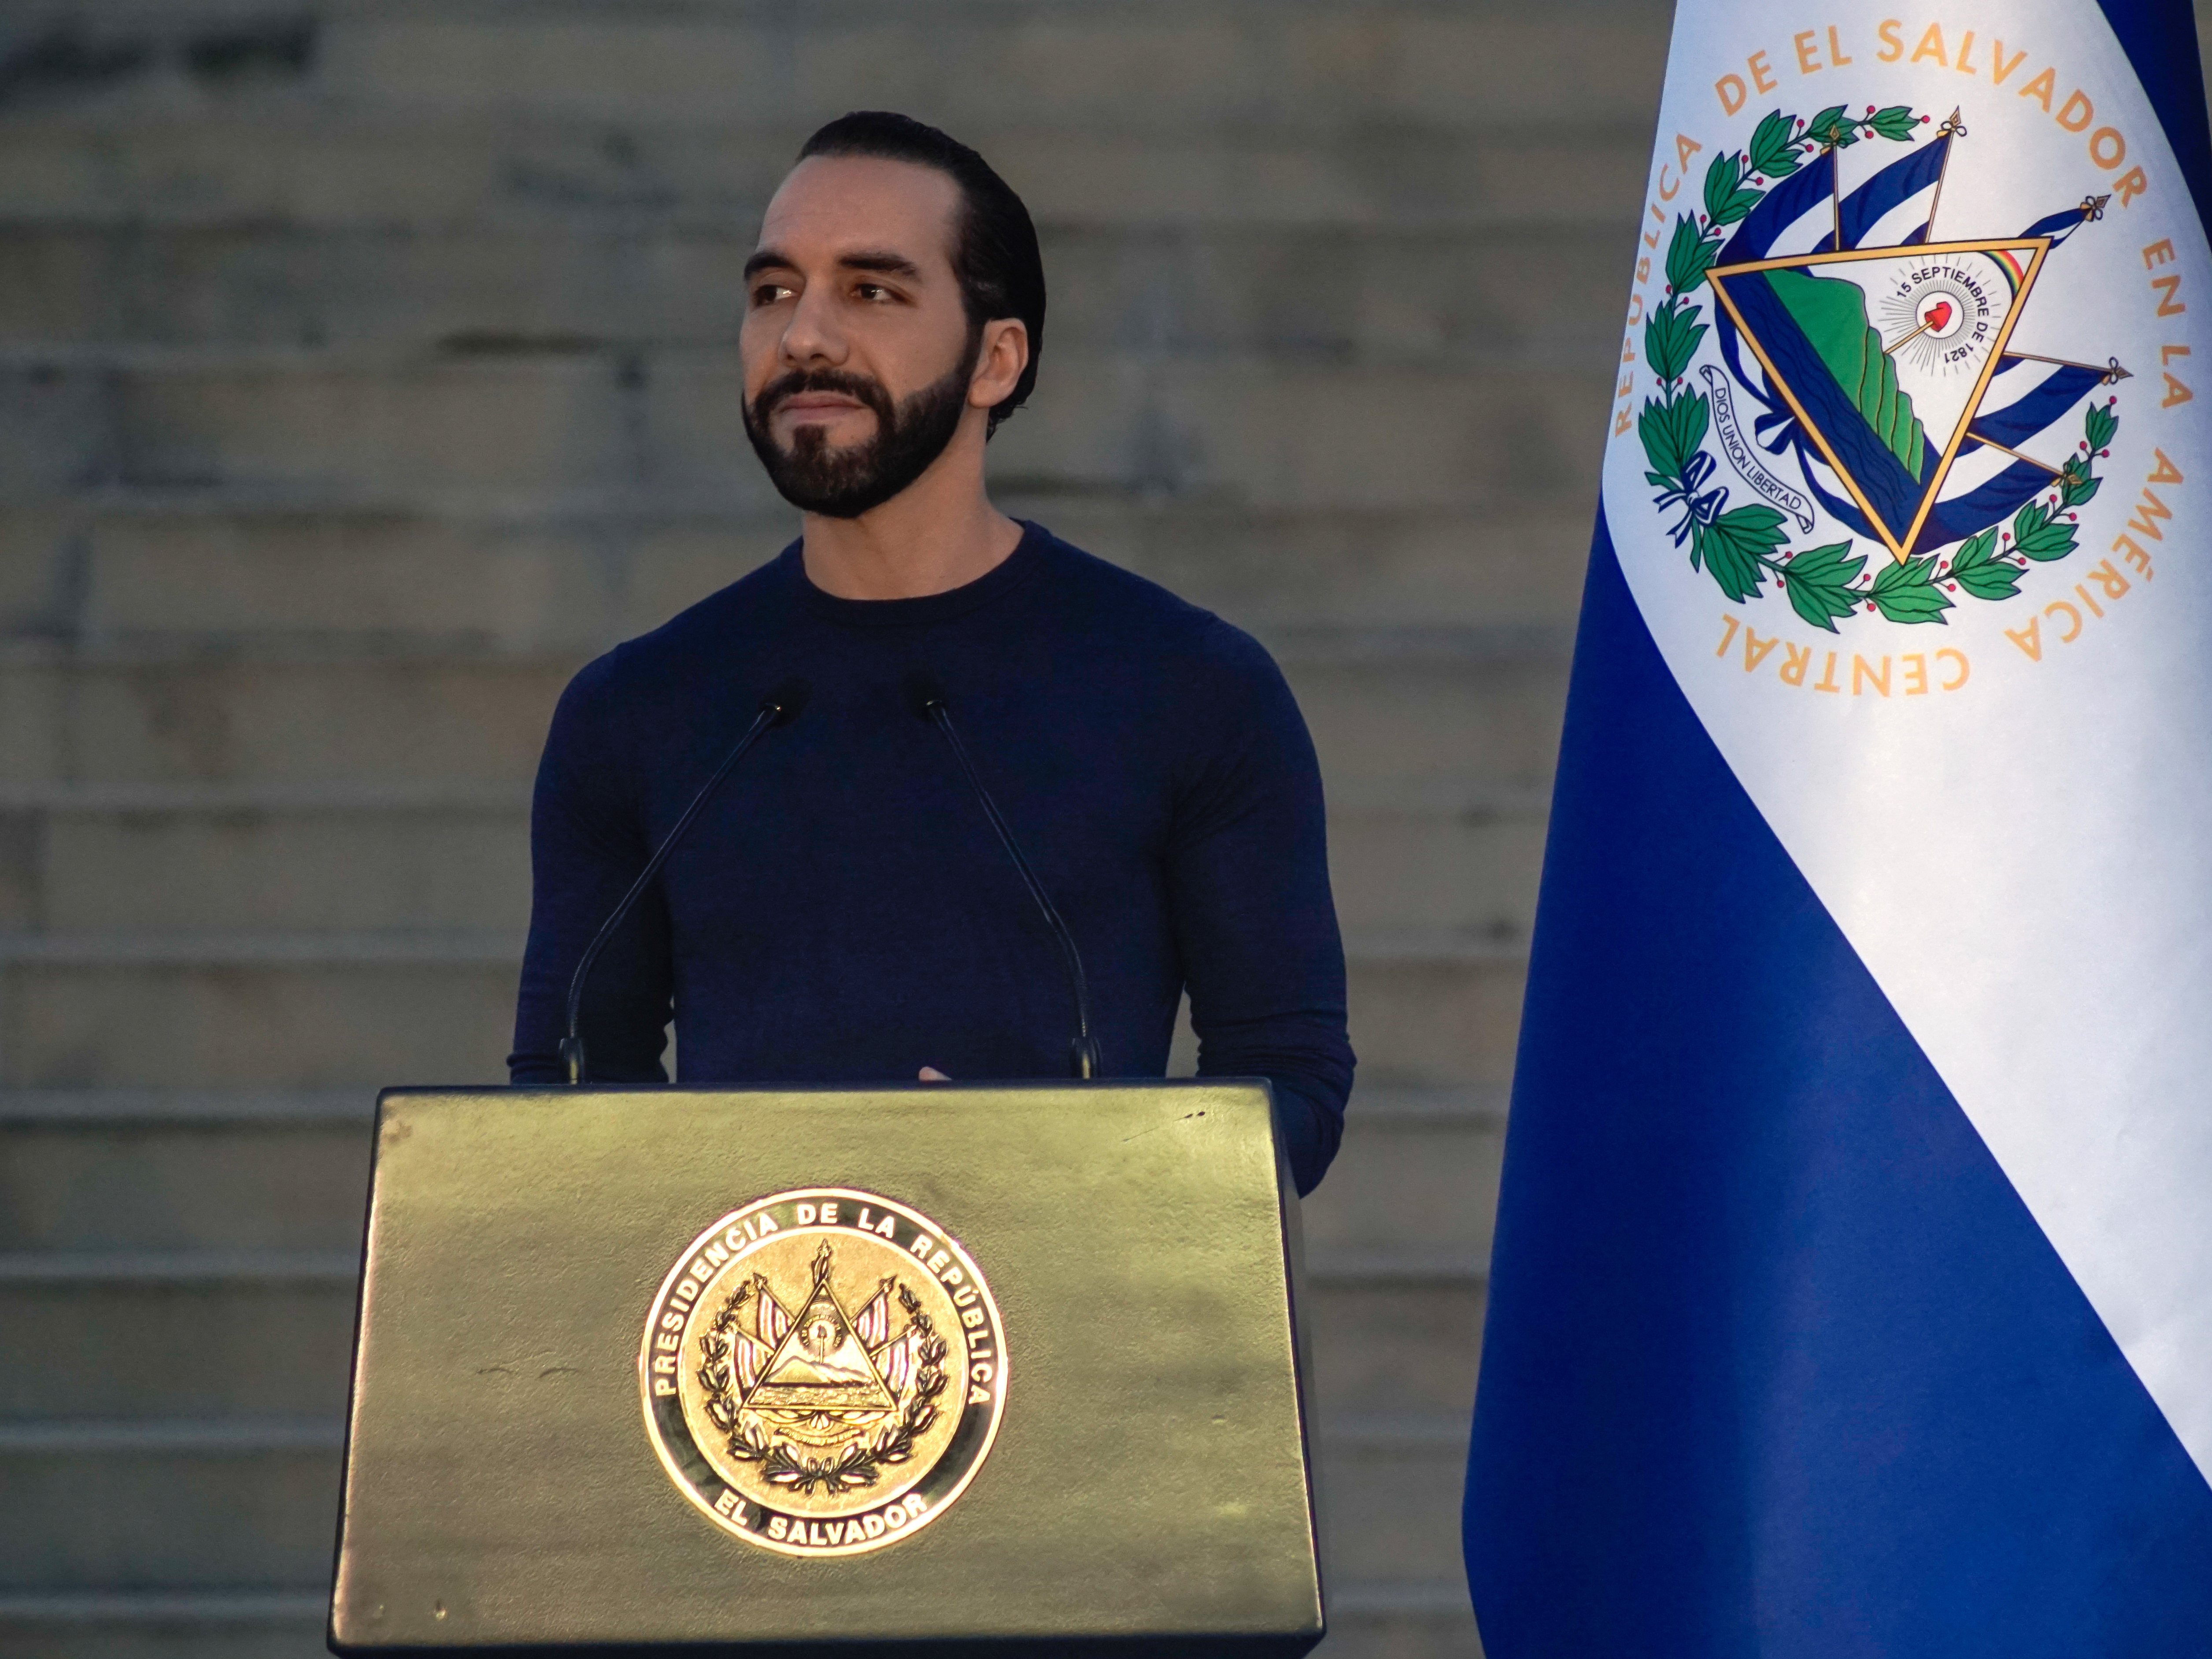 El Salvador is poised to reelect its popular but authoritarian